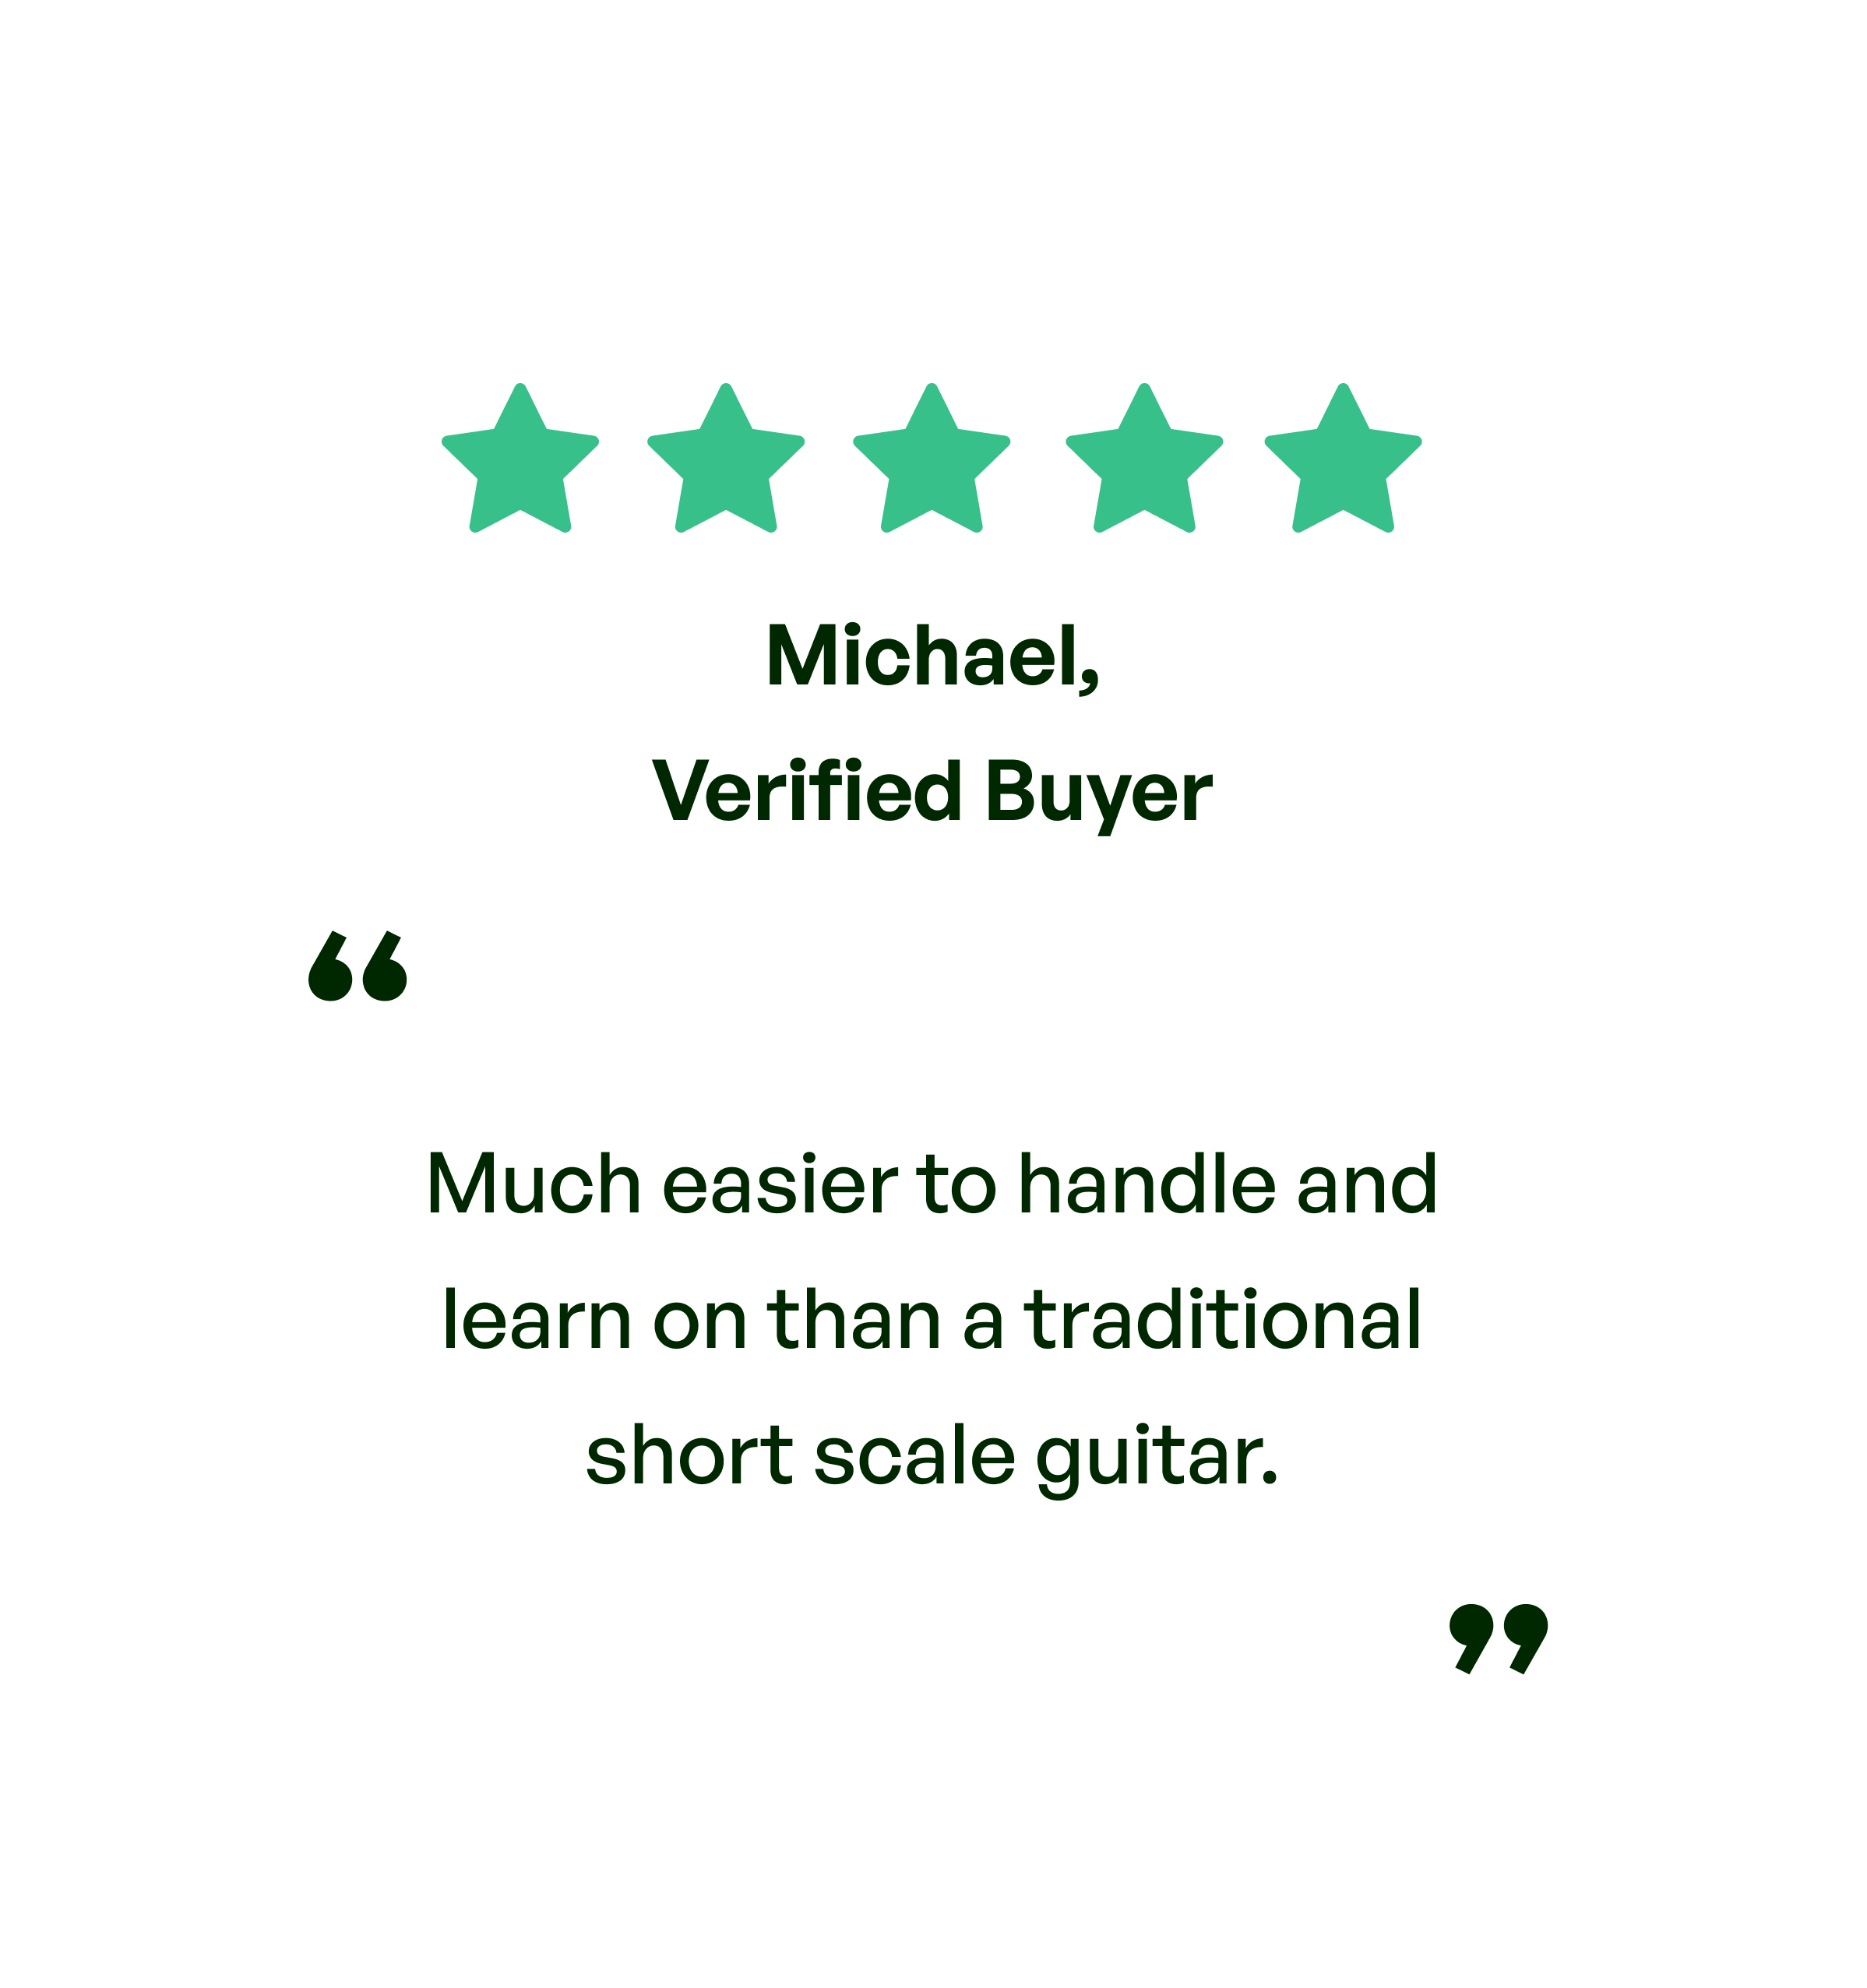 Five stars. Testimonial: Much easier to handle and learn on than a tradition short scale guitar. From Michael